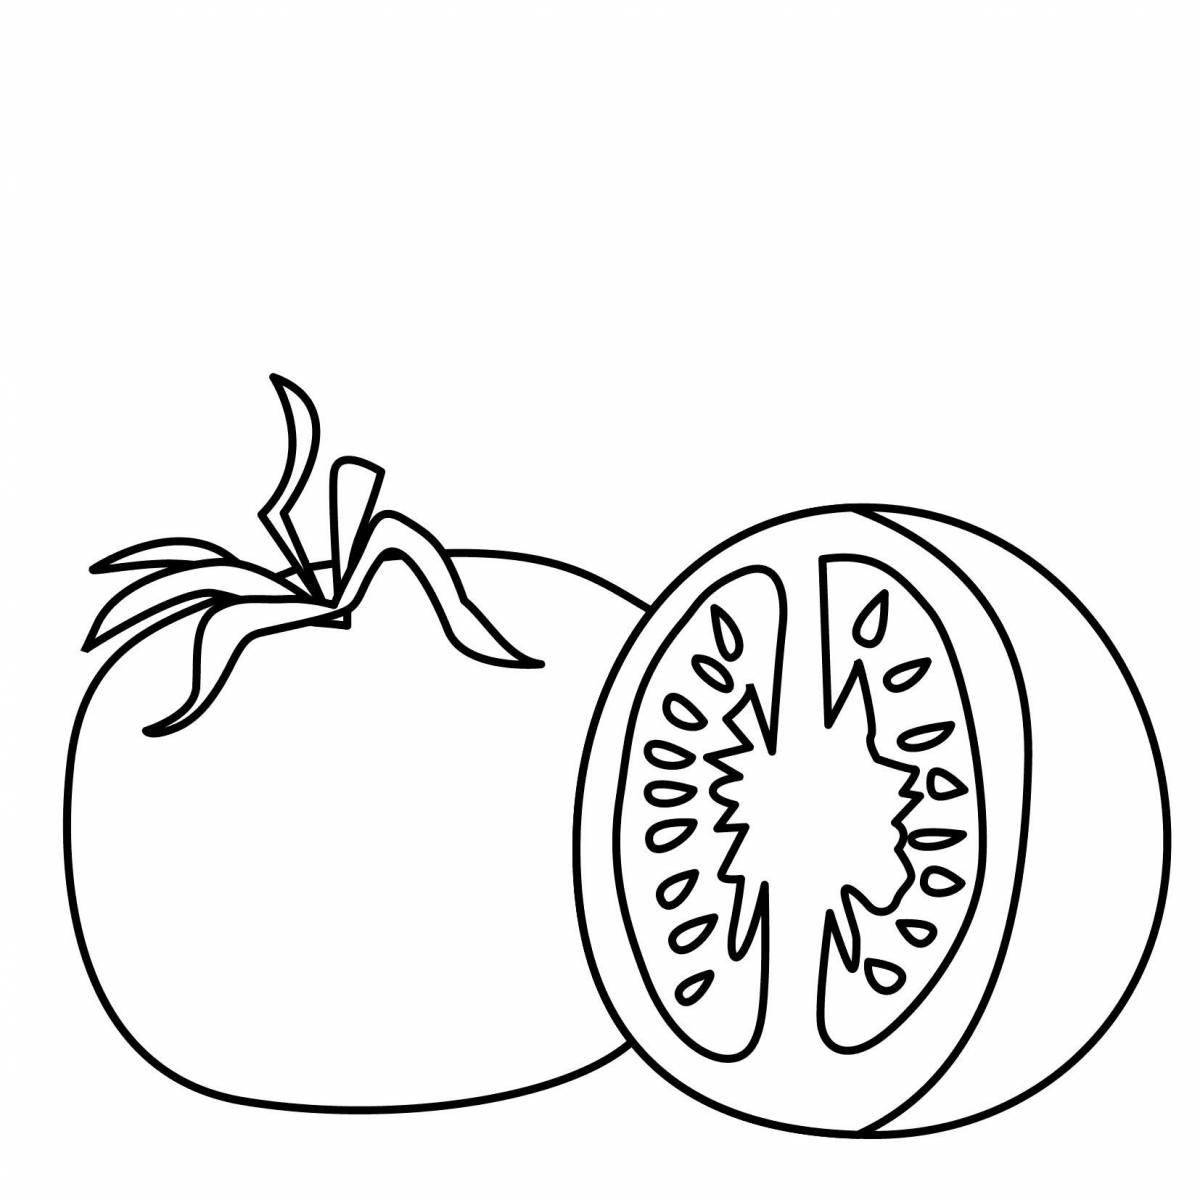 Great tomato coloring page for kids